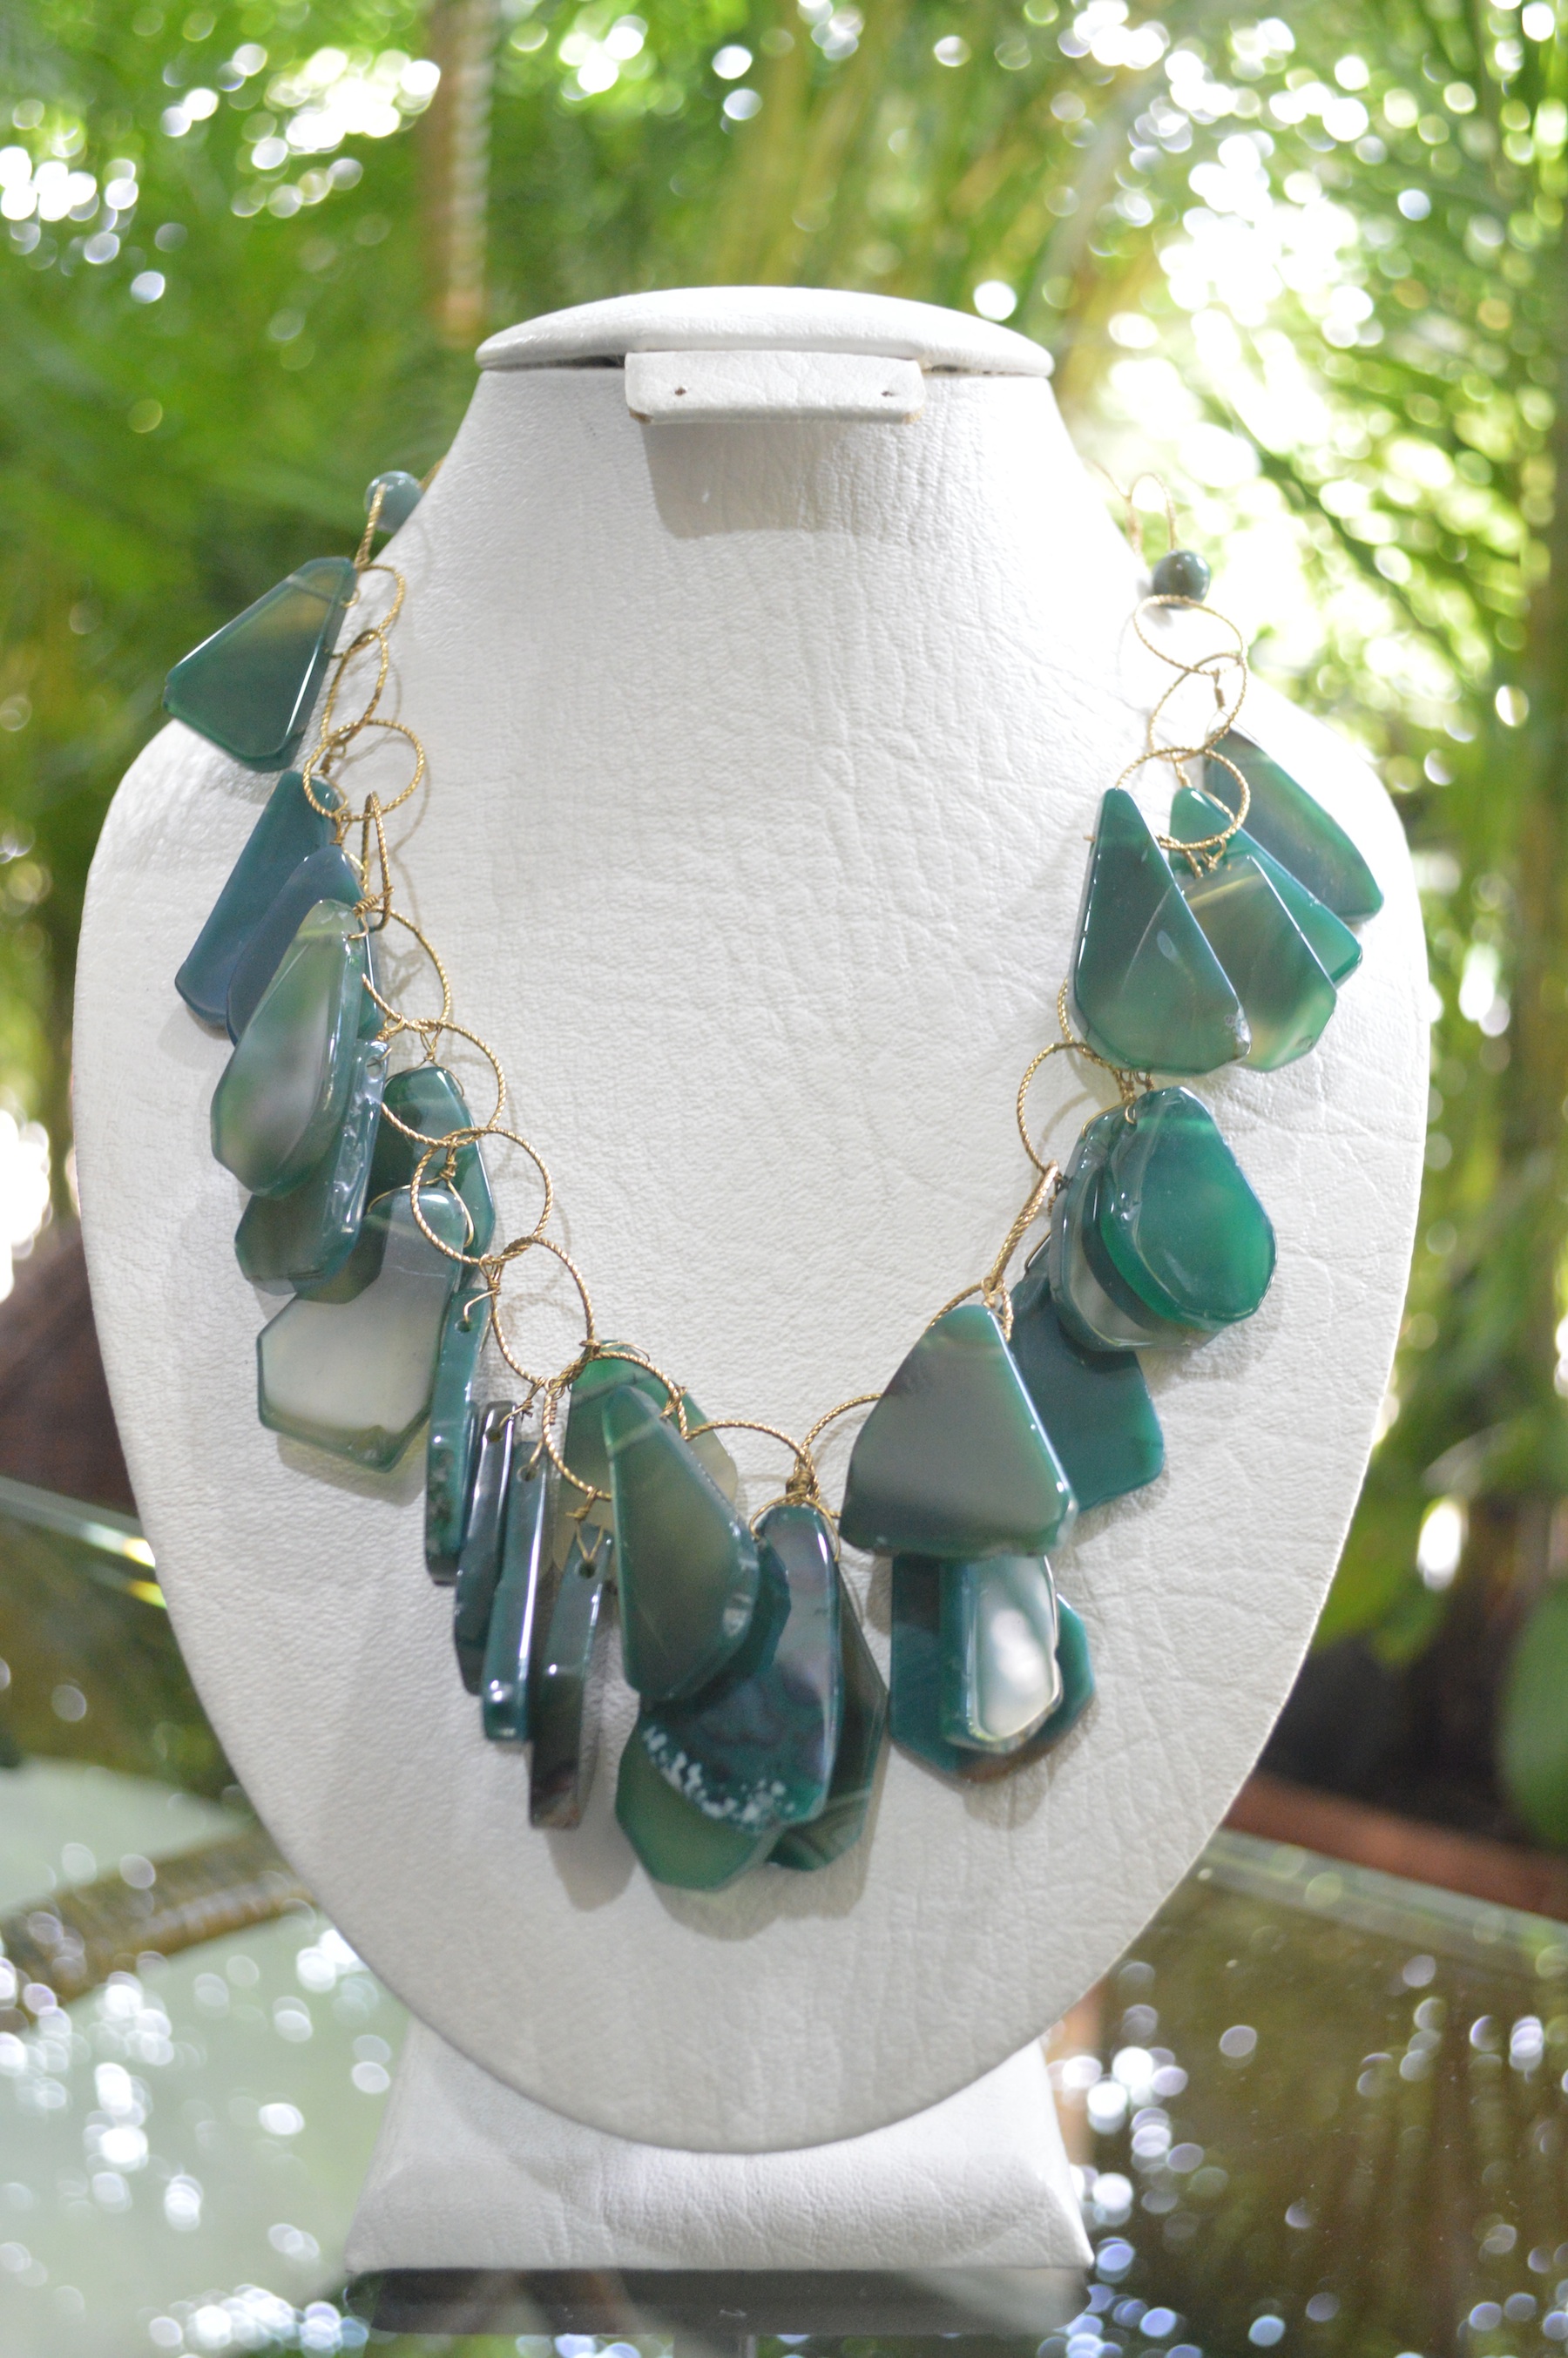 free falling gren-blue agate beads on gold filled chain